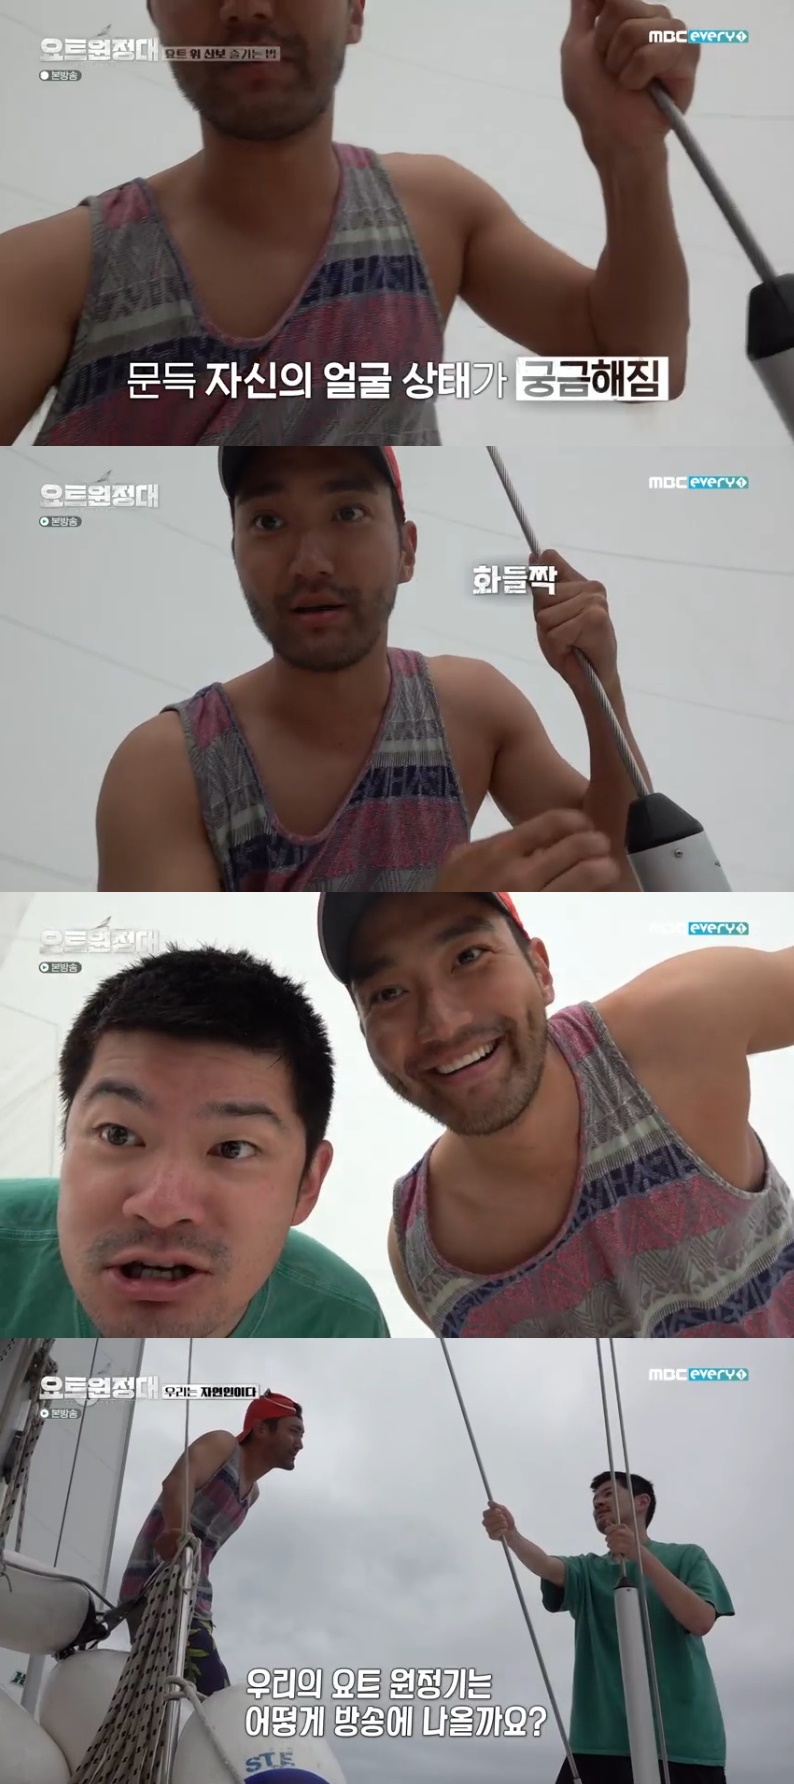 Seoul=) = Yot Expedition Choi Siwon, Chang Kiha were surprised.On the afternoon of the 28th, MBC Everlon entertainment program Yot Expedition, Choi Siwon, Chang Kiha, Jingu and Song Ho Jun were on the 7th day of the voyage.On this day, Choi Siwon looked at the sea and said, How do you get on that screen?He was immediately surprised and provoked a laugh, as was Chang Kiha, who was next to him, saying, What is it? Is it a refugee? My face is locally burned.Choi Siwon laughed at himself, saying, Is it a beggar? And worried, Is not the viewers turning the channel because they are dirty?Chang Kiha then confessed, I cant care about that when I come here, its hard to stand without tilting.How do you think our yachting expedition will come out on air? asked Choi Siwon, who replied, Theres nothing you can tell.Choi Siwon said, It seems that only people who can afford to sail can sail.